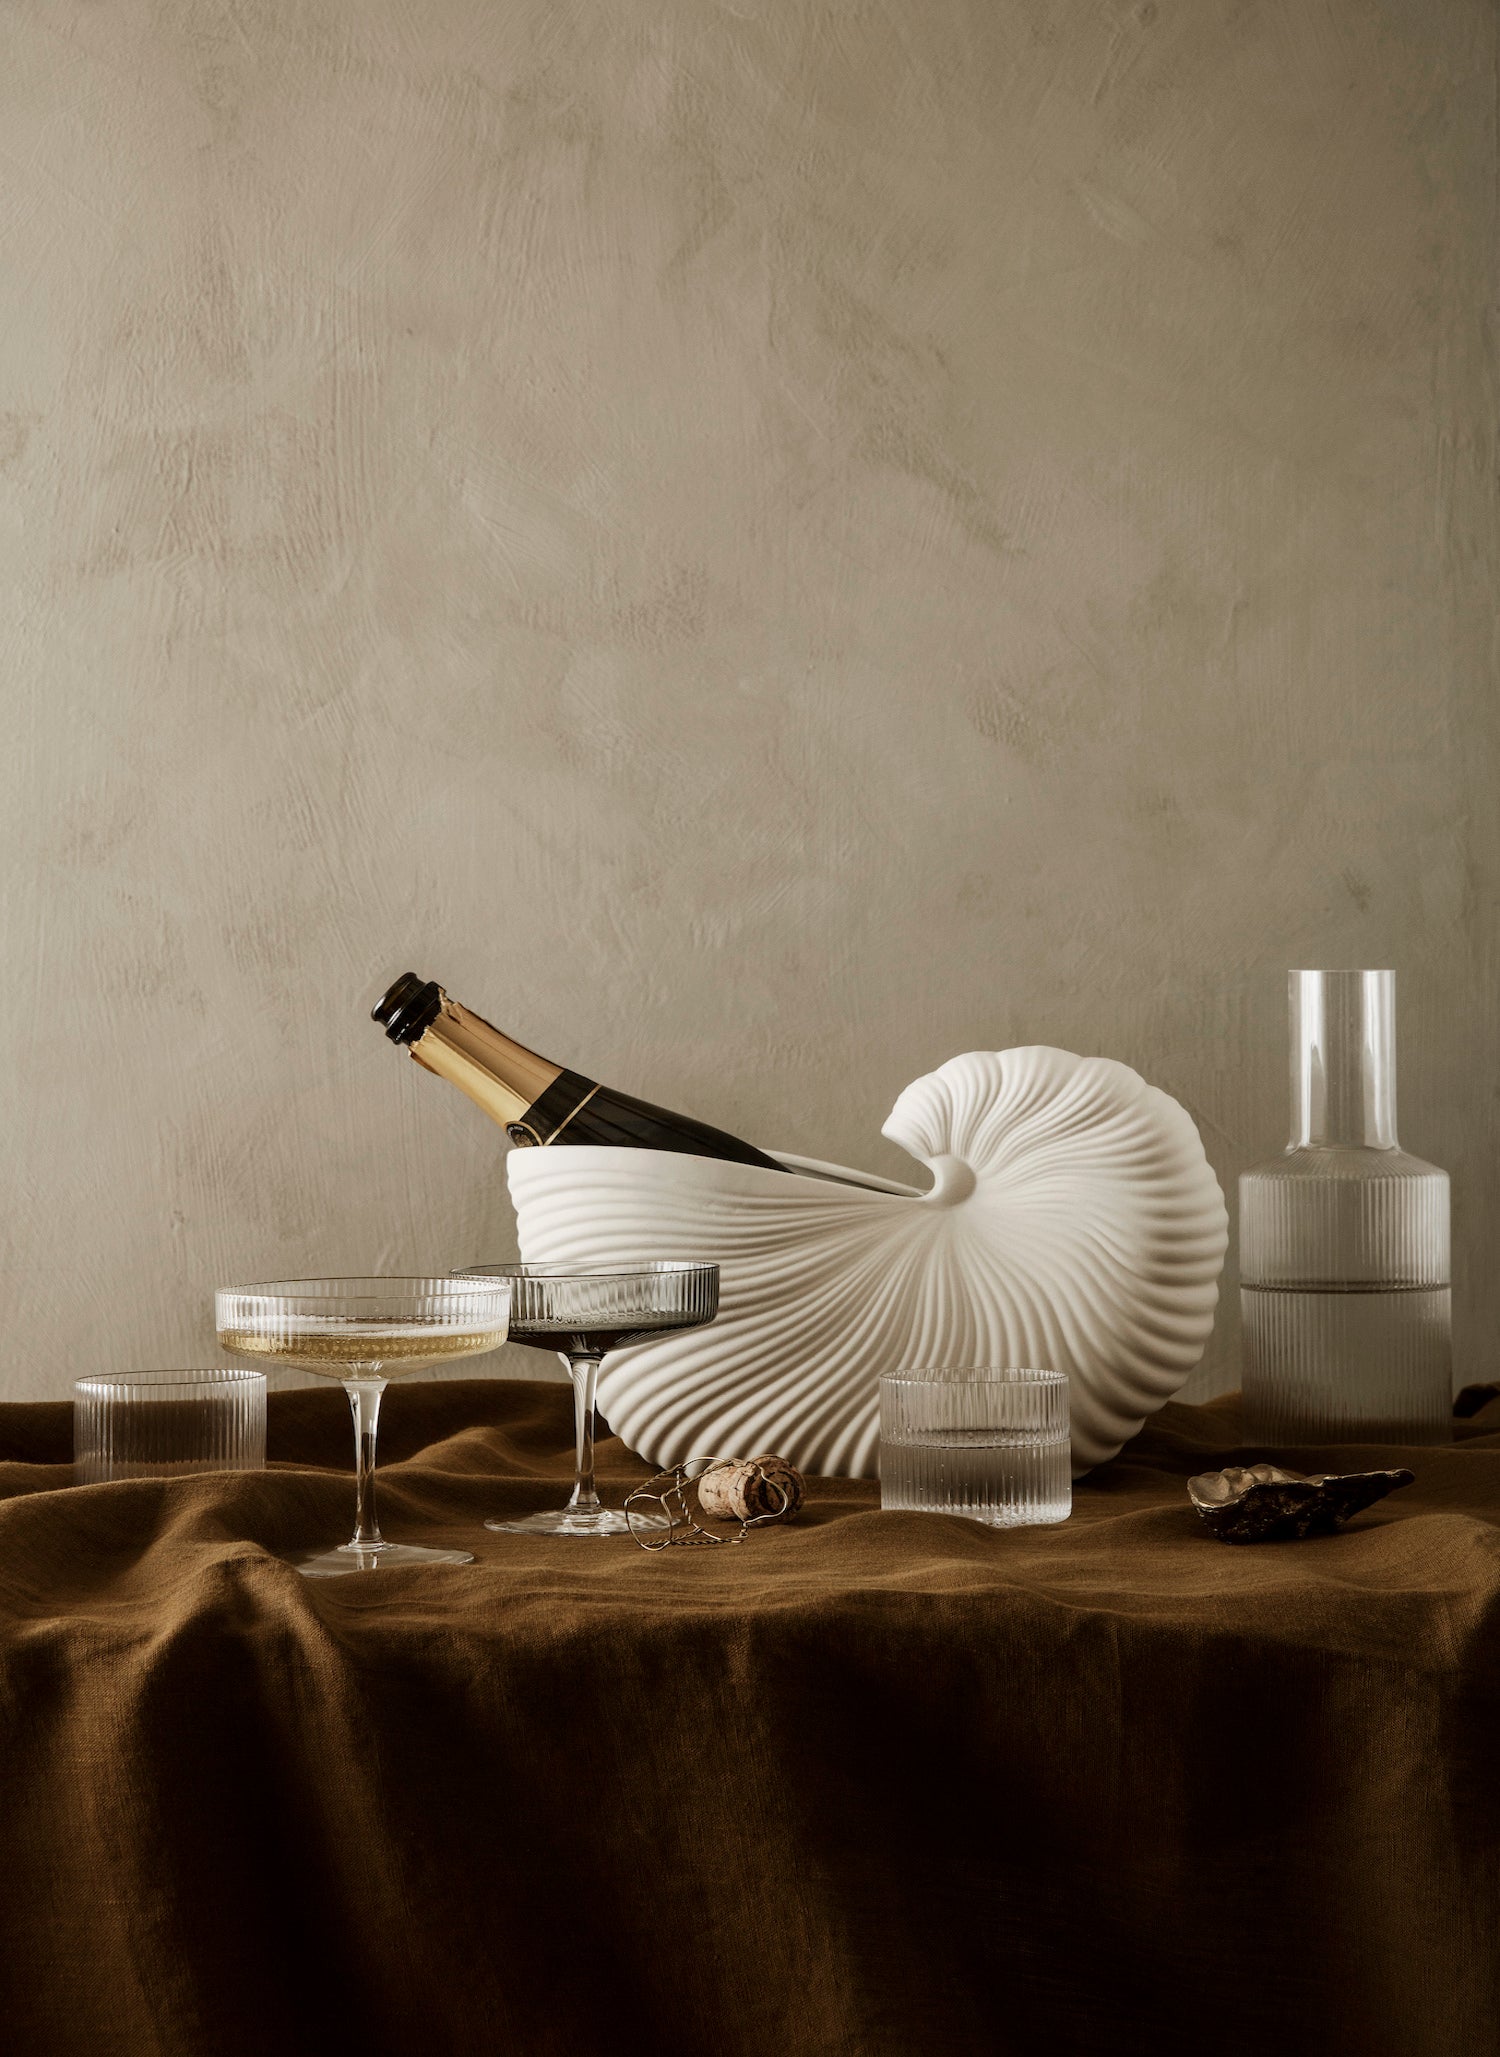 Ripple champagne coupes and shell pot on festive table.